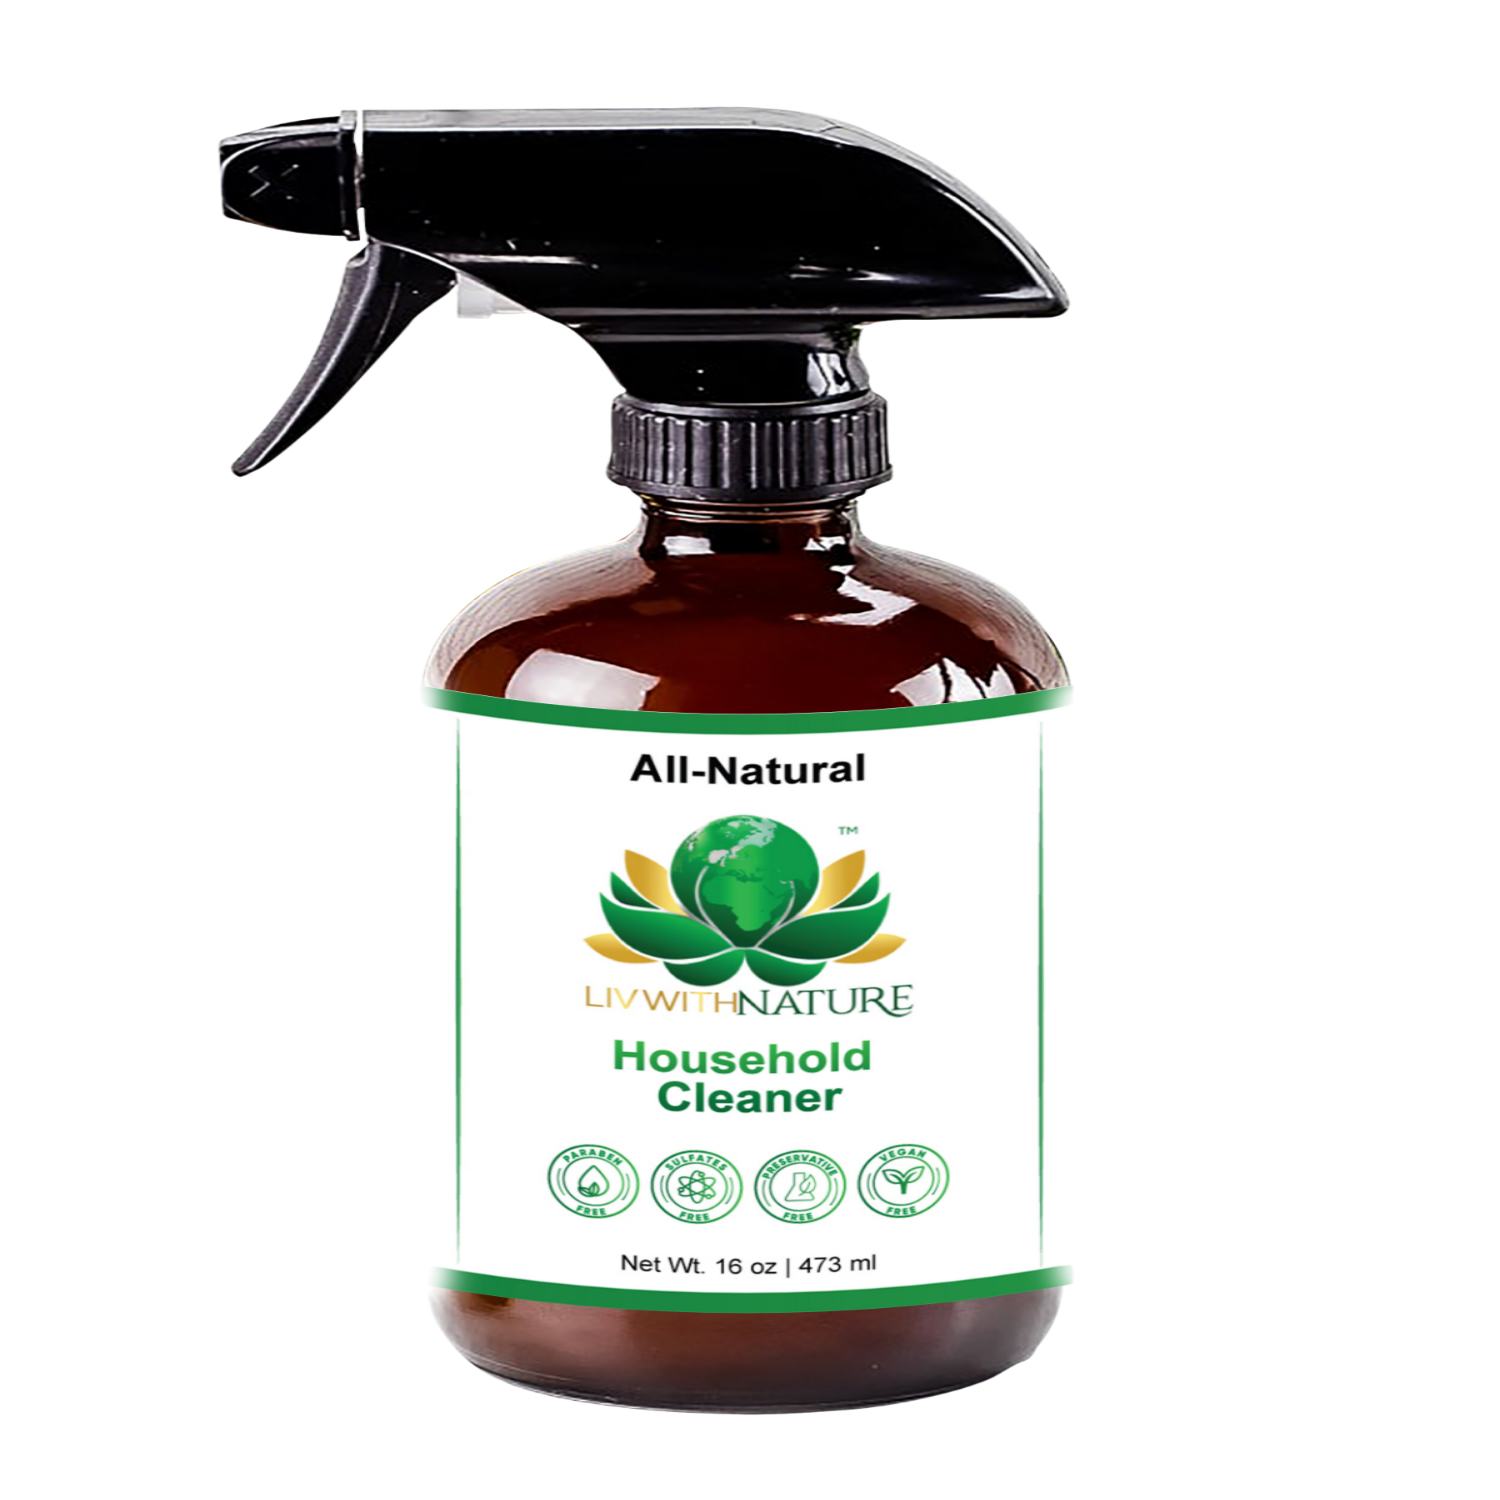 All-Natural Household Cleaner